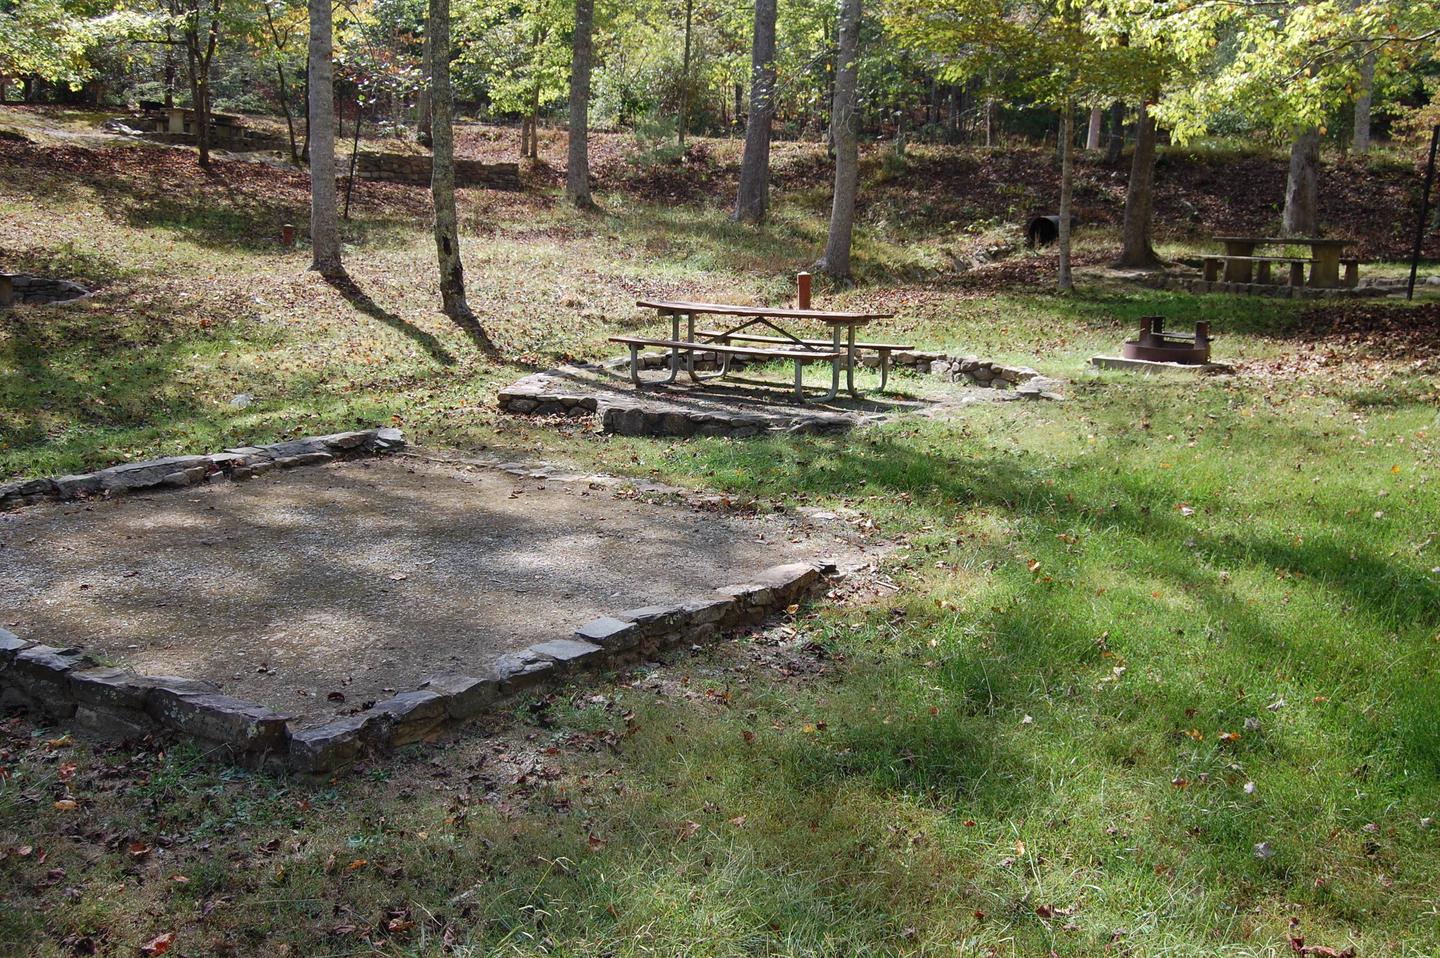 8Site is open and features plenty of sun and grass. It is located in the interior loop of the campsite. 